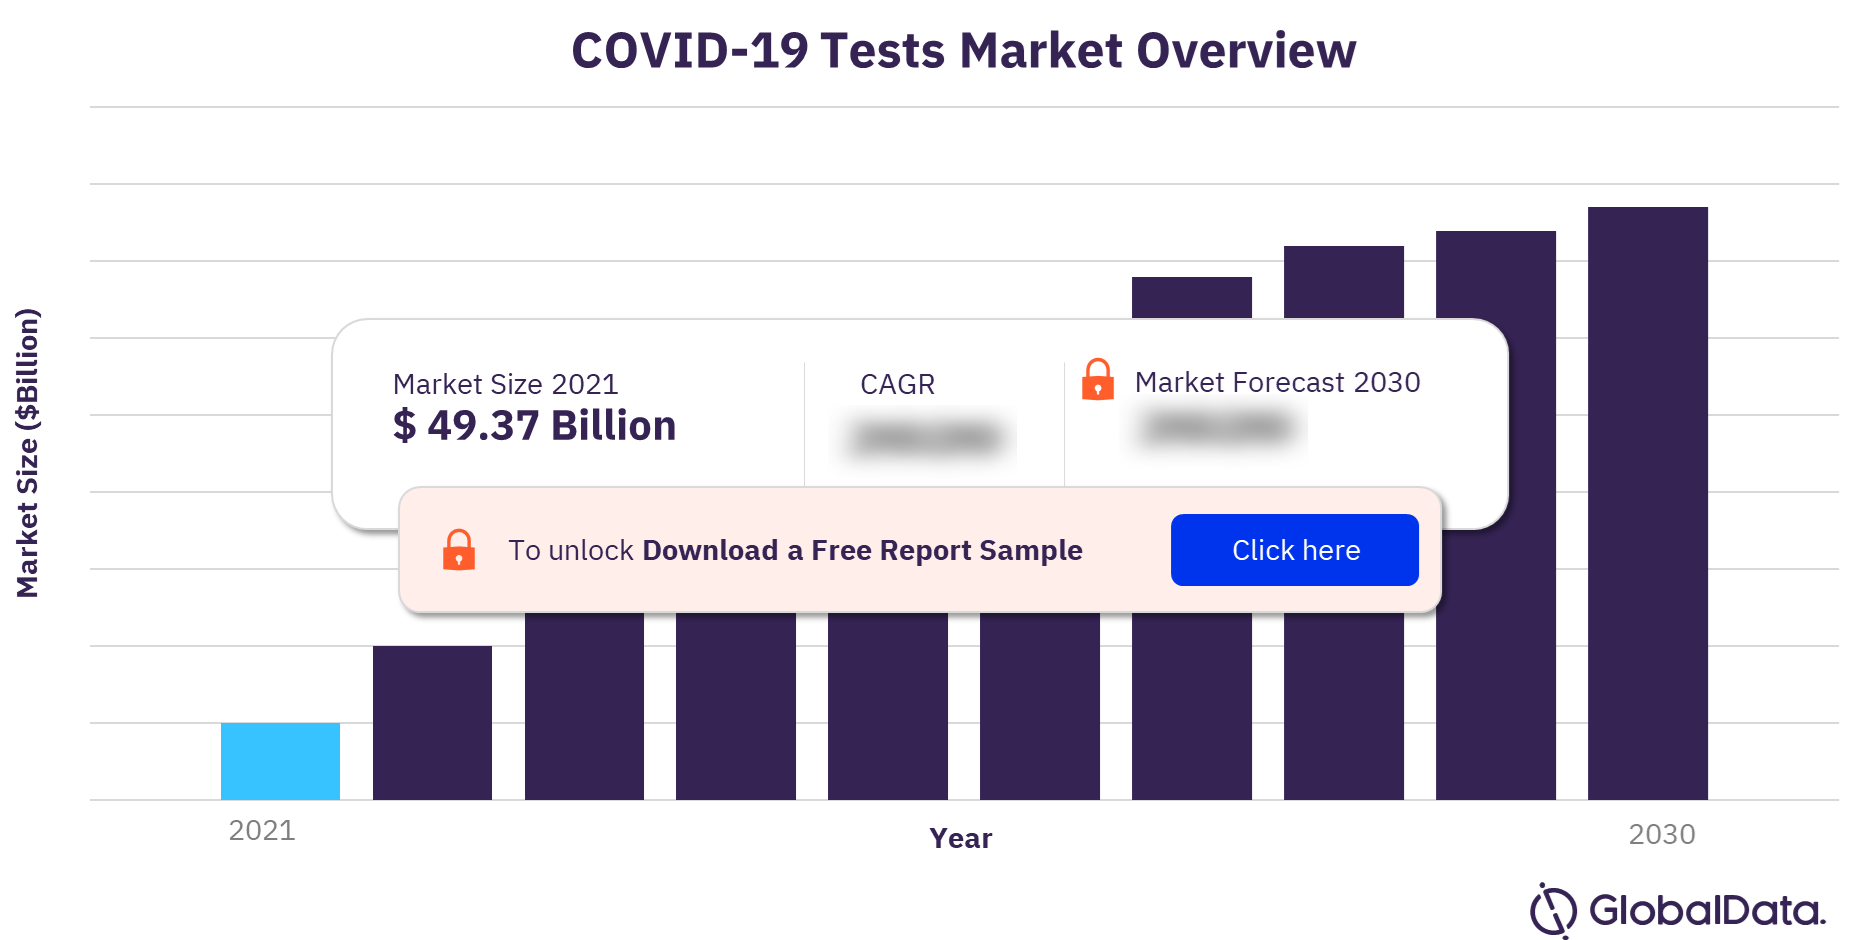 COVID-19 tests market overview